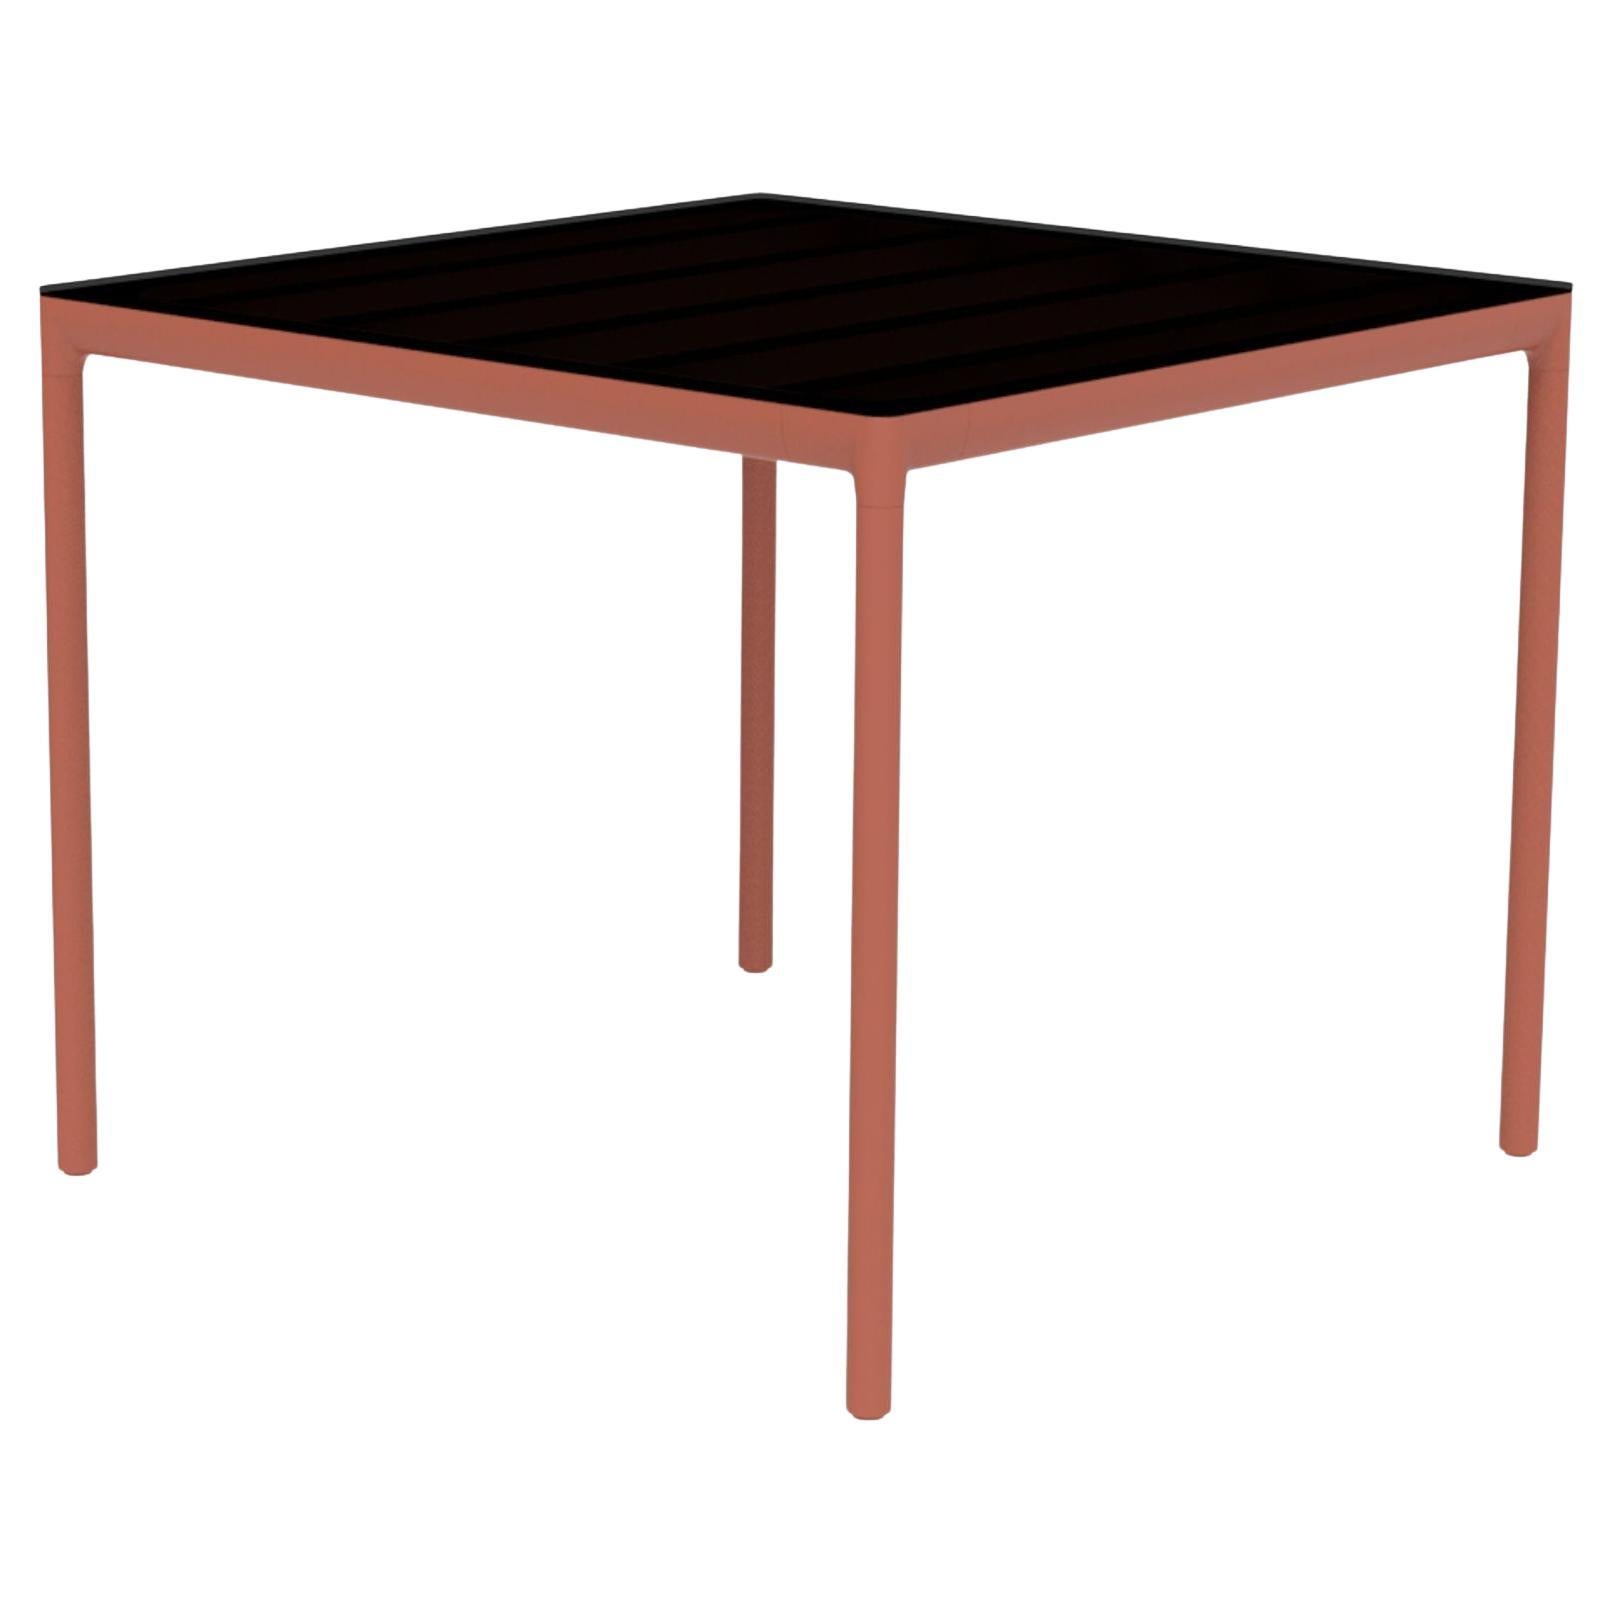 Ribbons Salmon 90 Table by Mowee For Sale